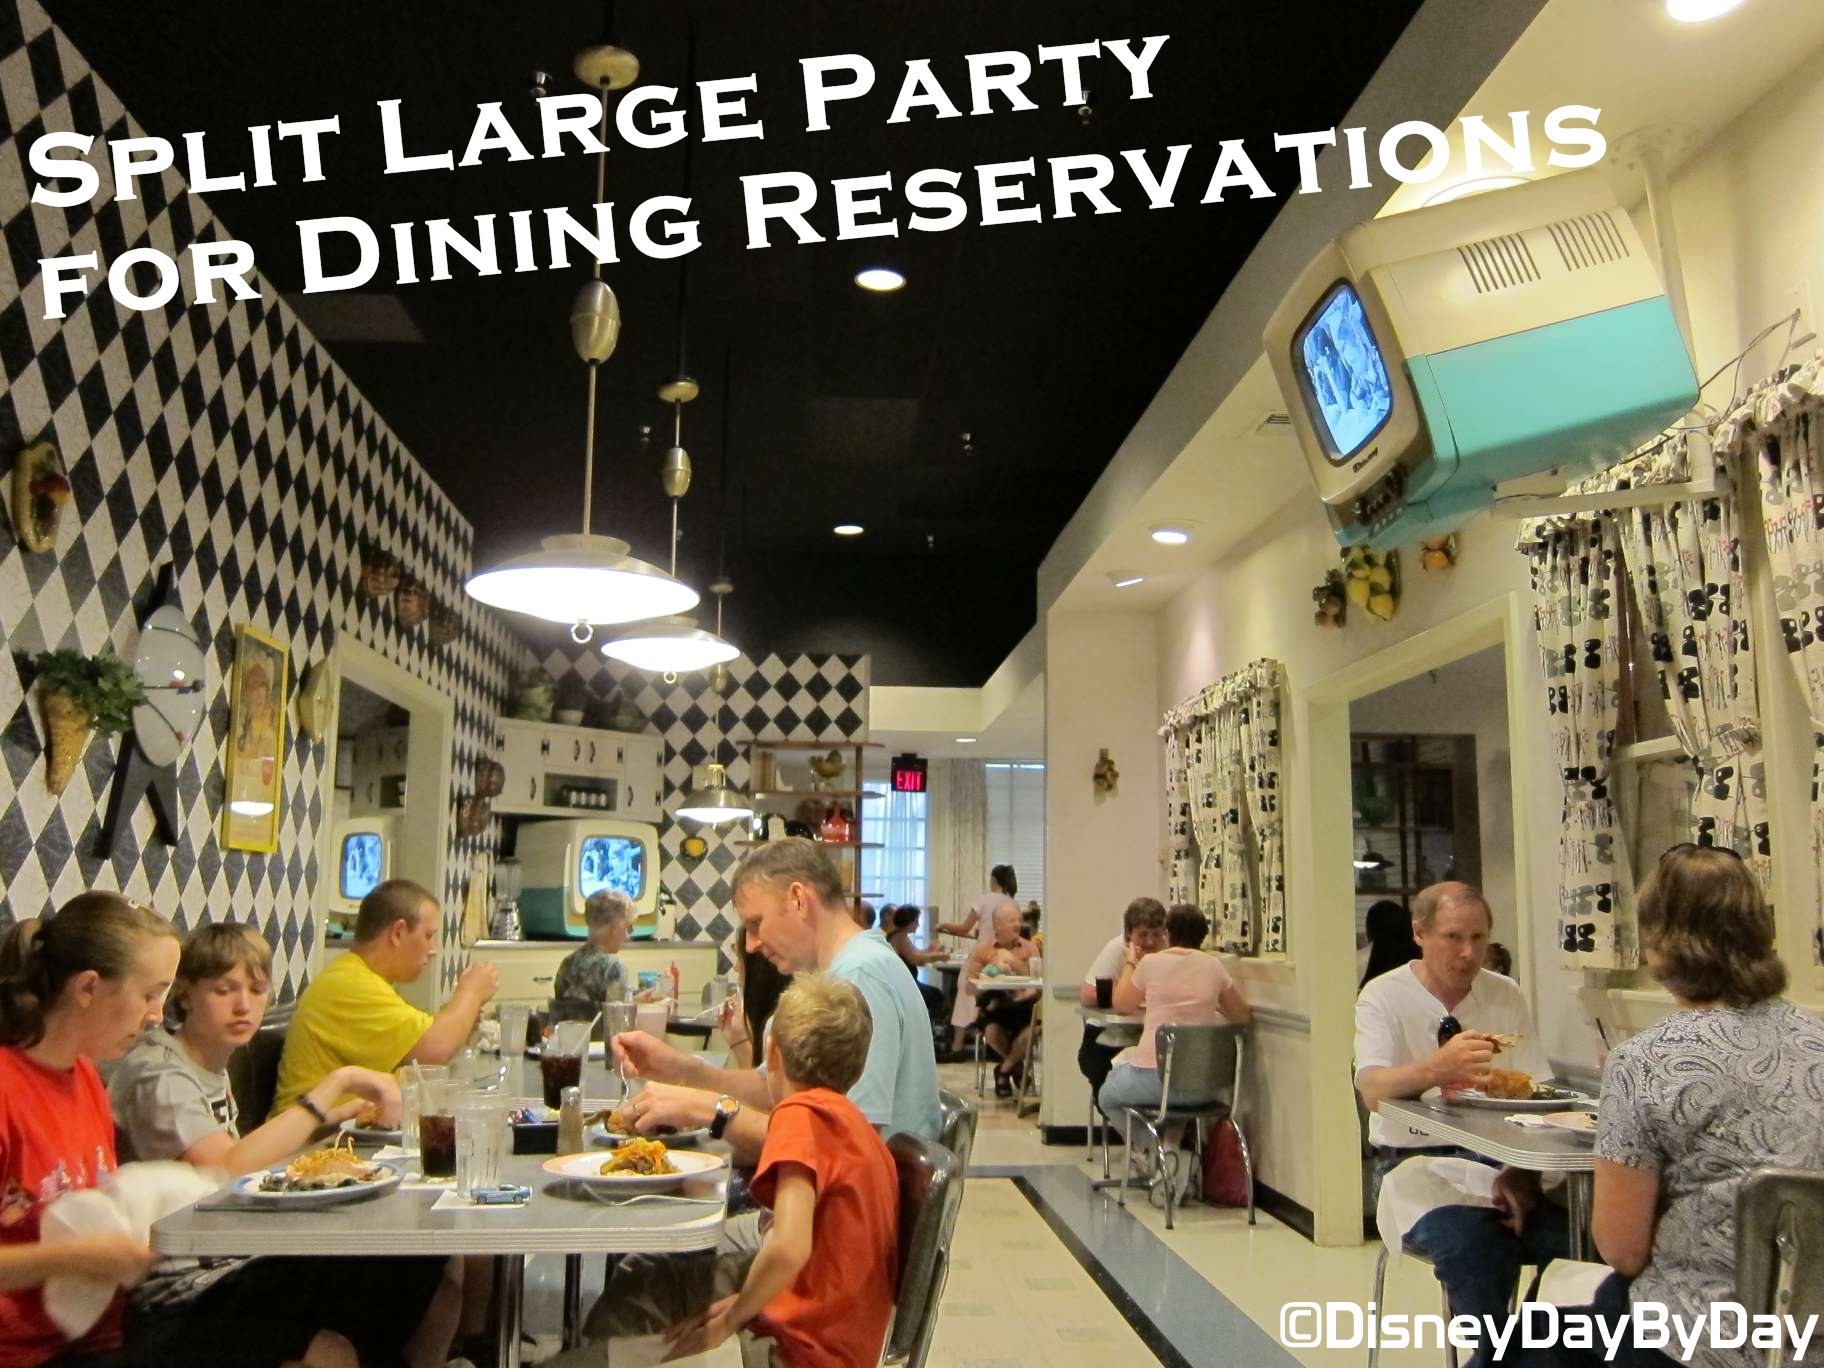 Travel Tip: Splitting Large Party for Dining